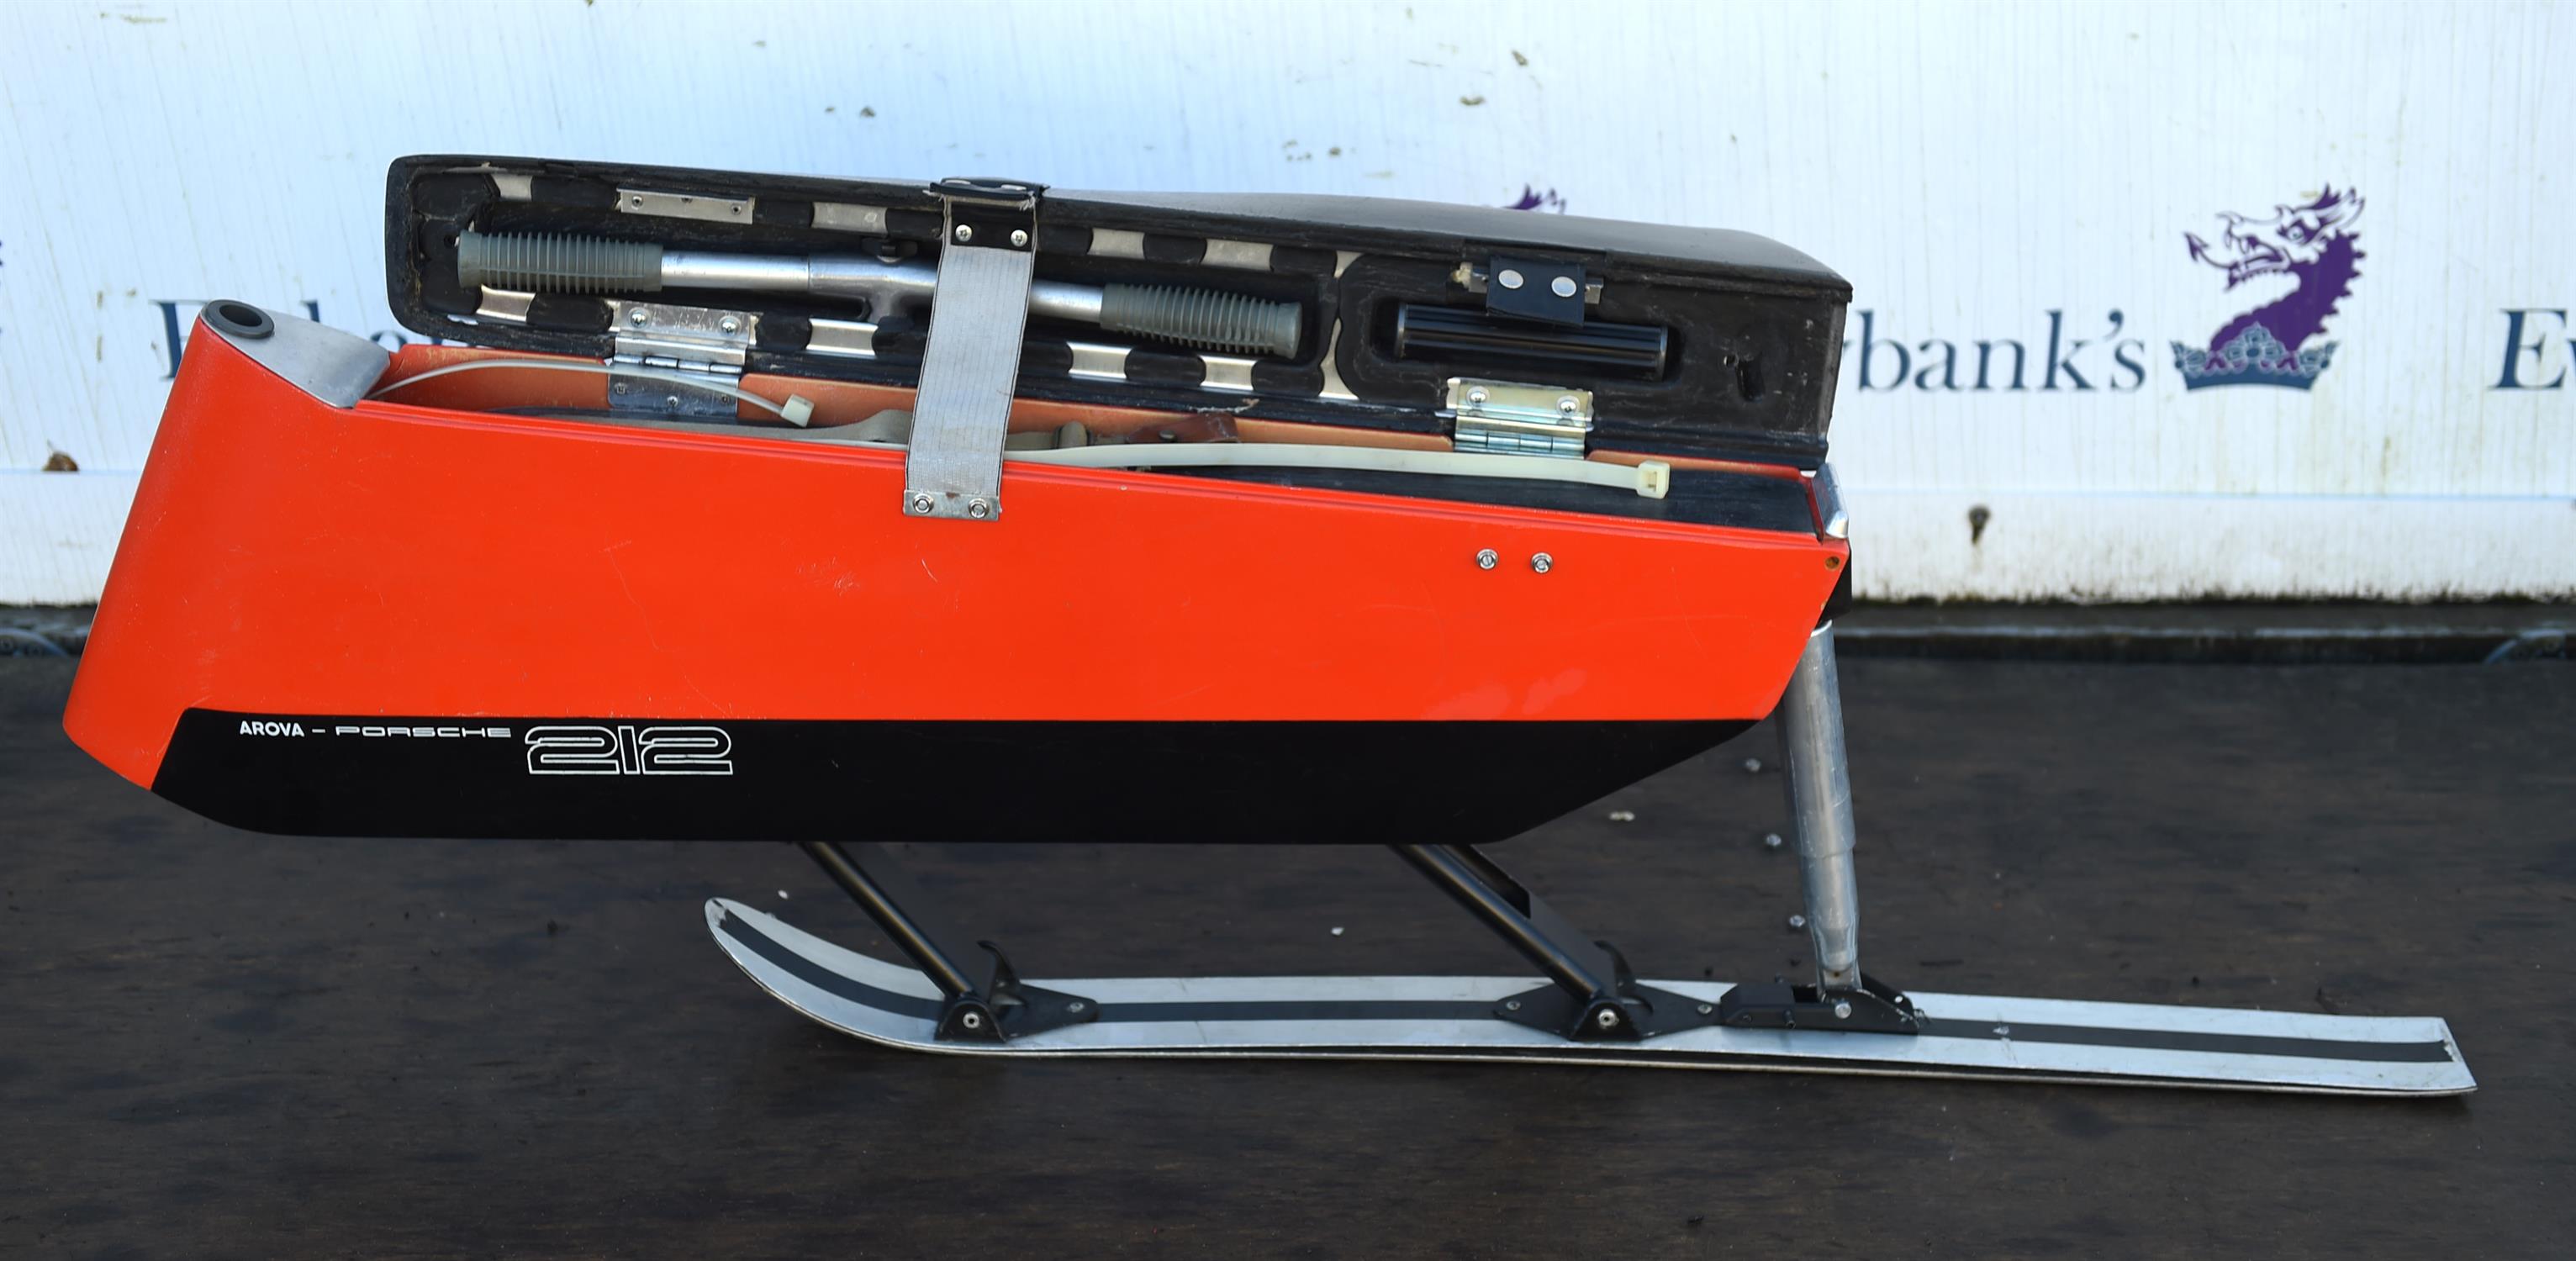 Red Arova-Porsche 212 Skibob - Manufactured in 1970 with the specific dimensions to fit into the - Image 6 of 8